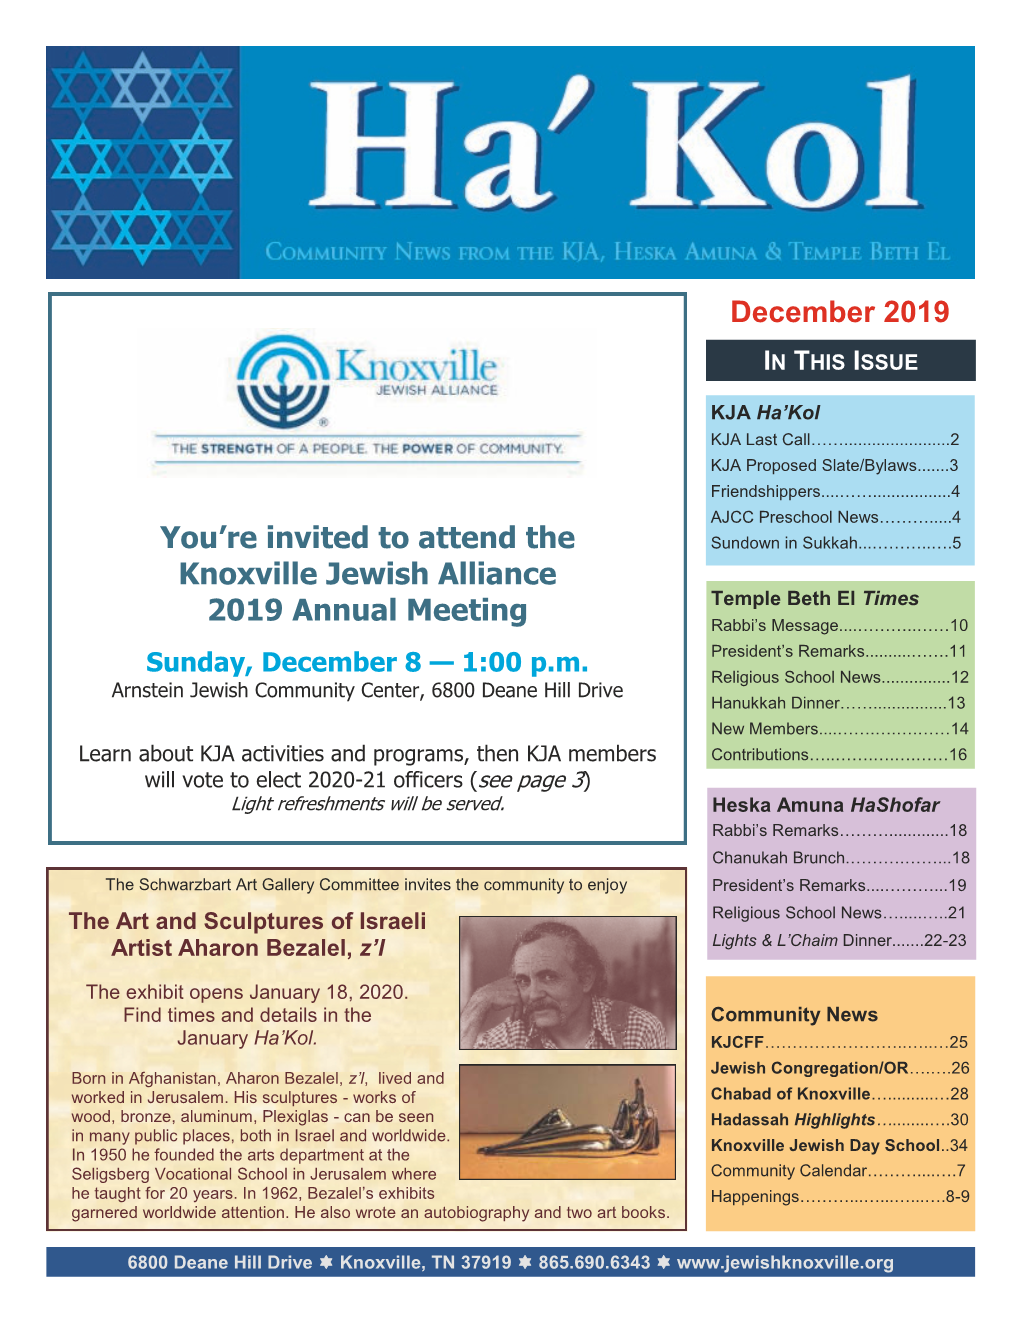 December 2019 You're Invited to Attend the Knoxville Jewish Alliance